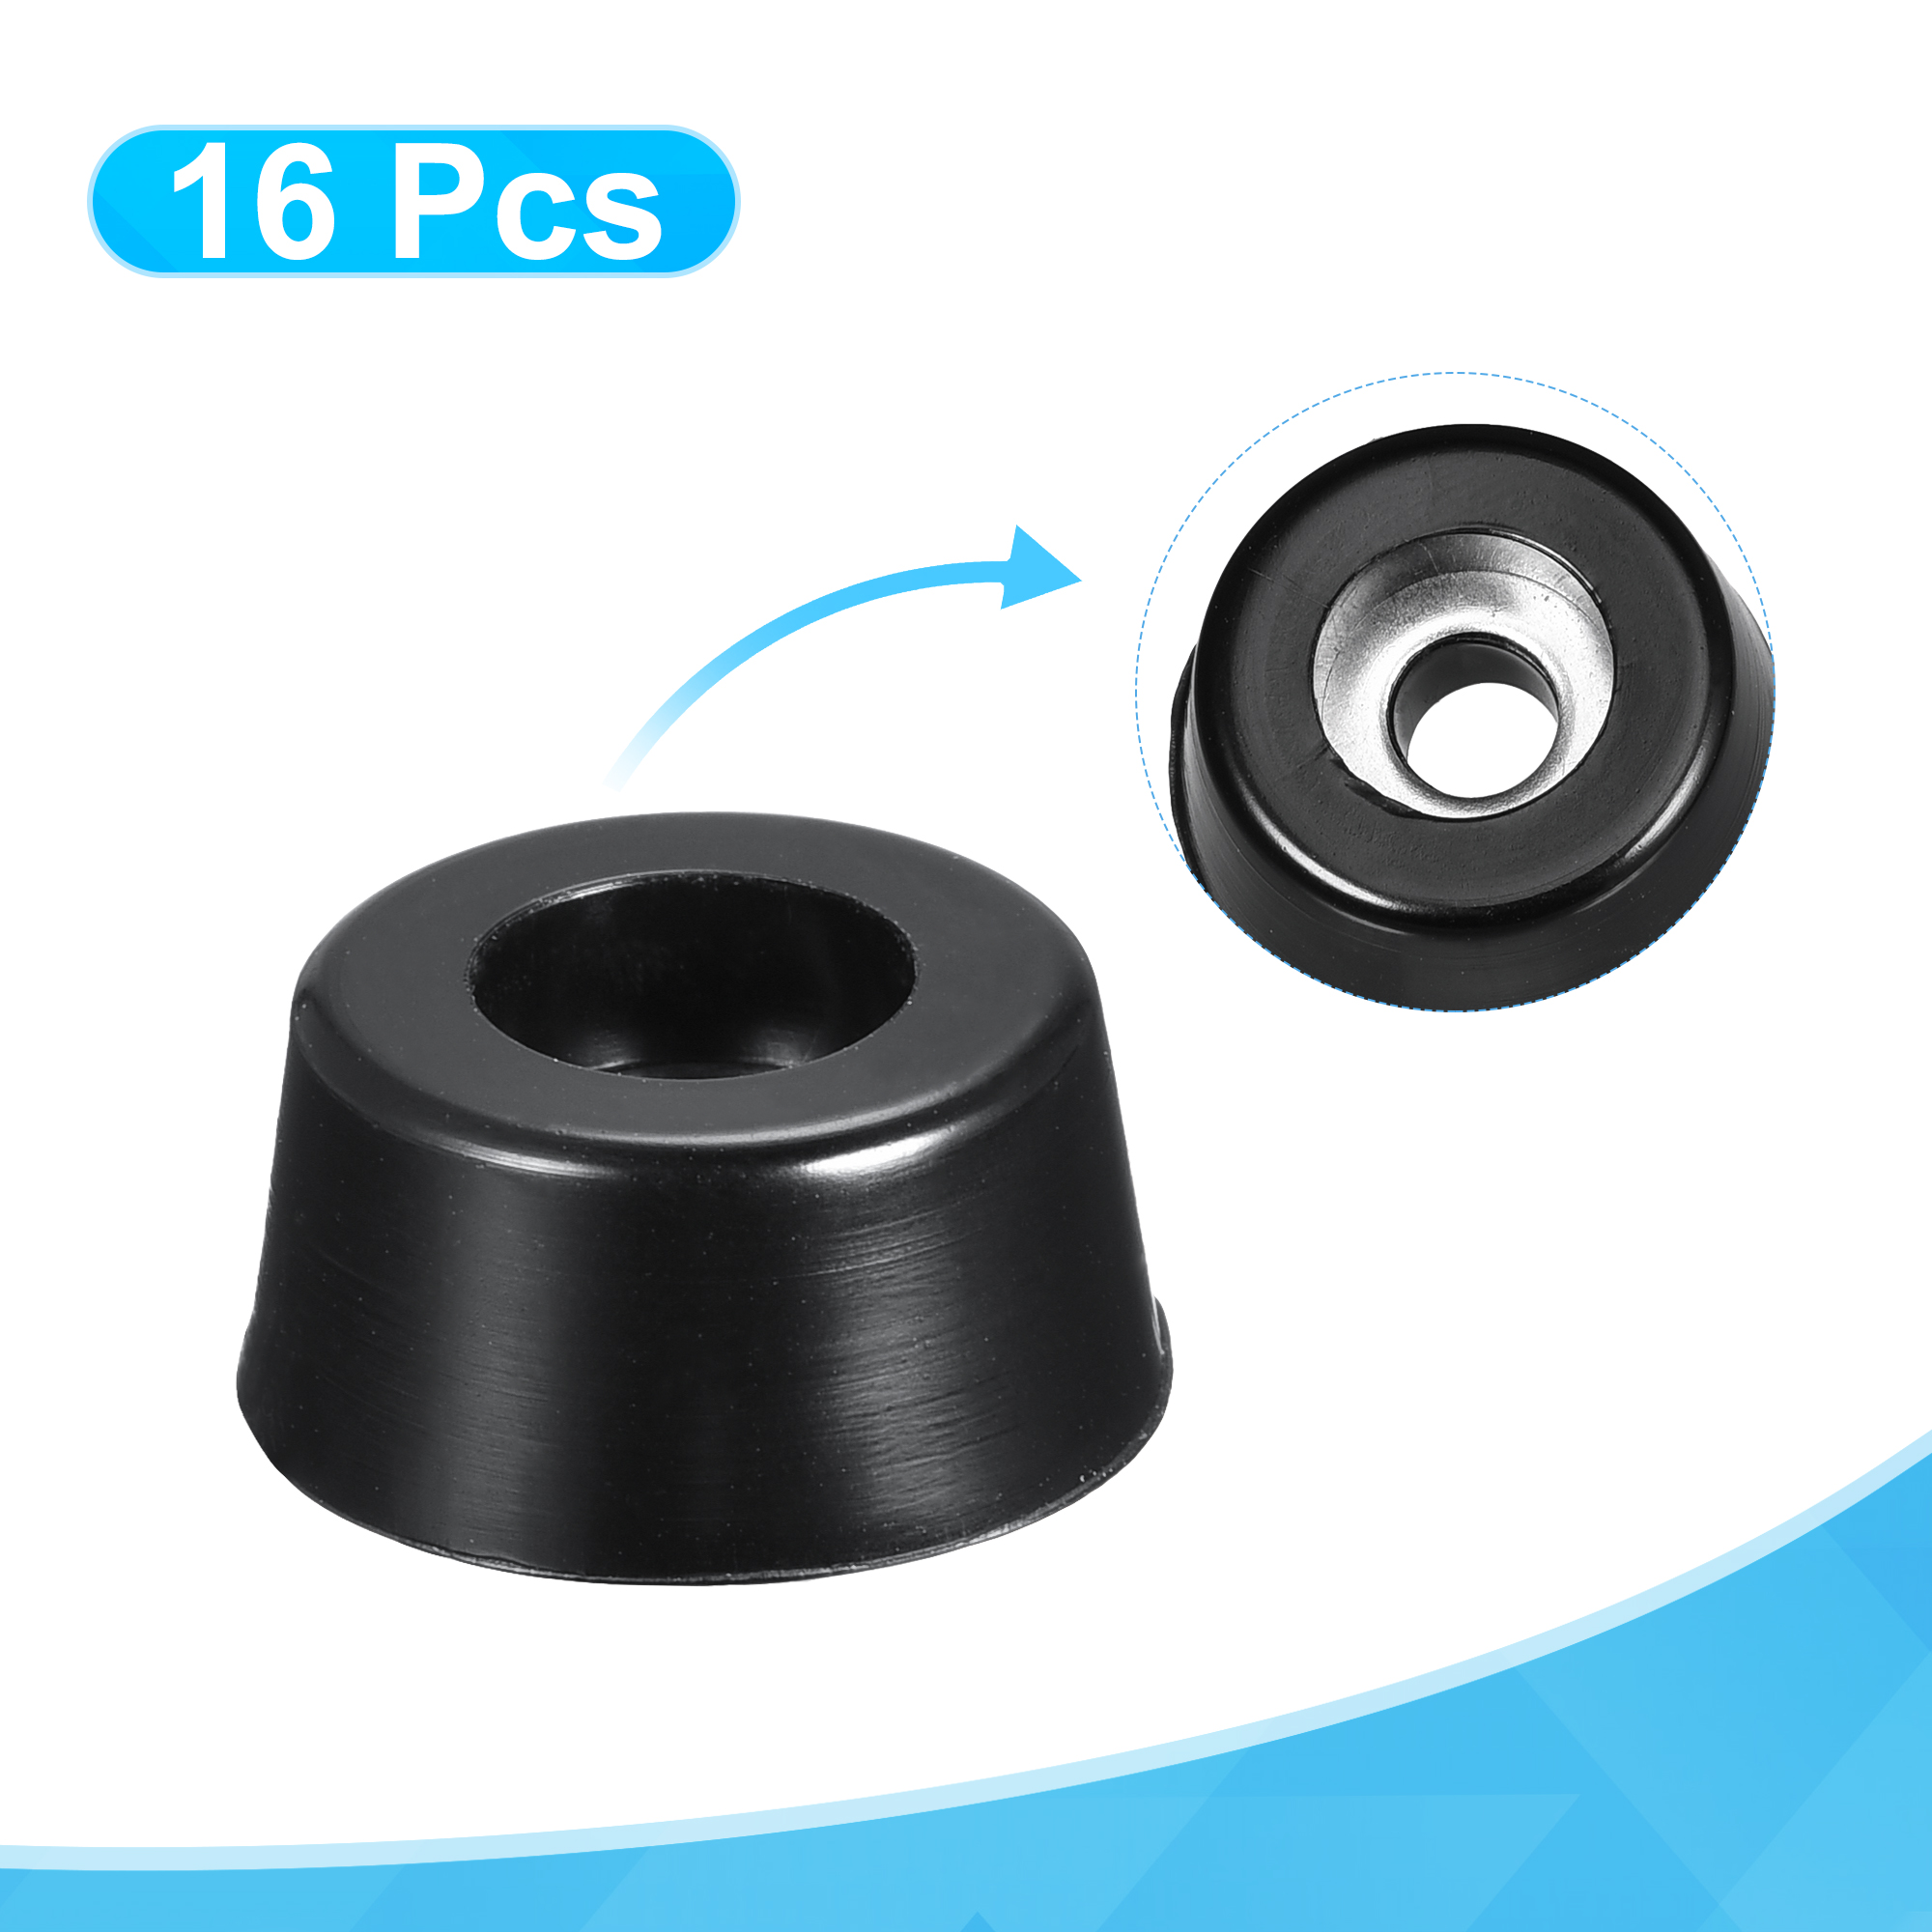 Uxcell 0.71" W x  0.31" H Rubber Bumper Feet, Stainless Steel Screws and Washer 16 Pack - image 4 of 5